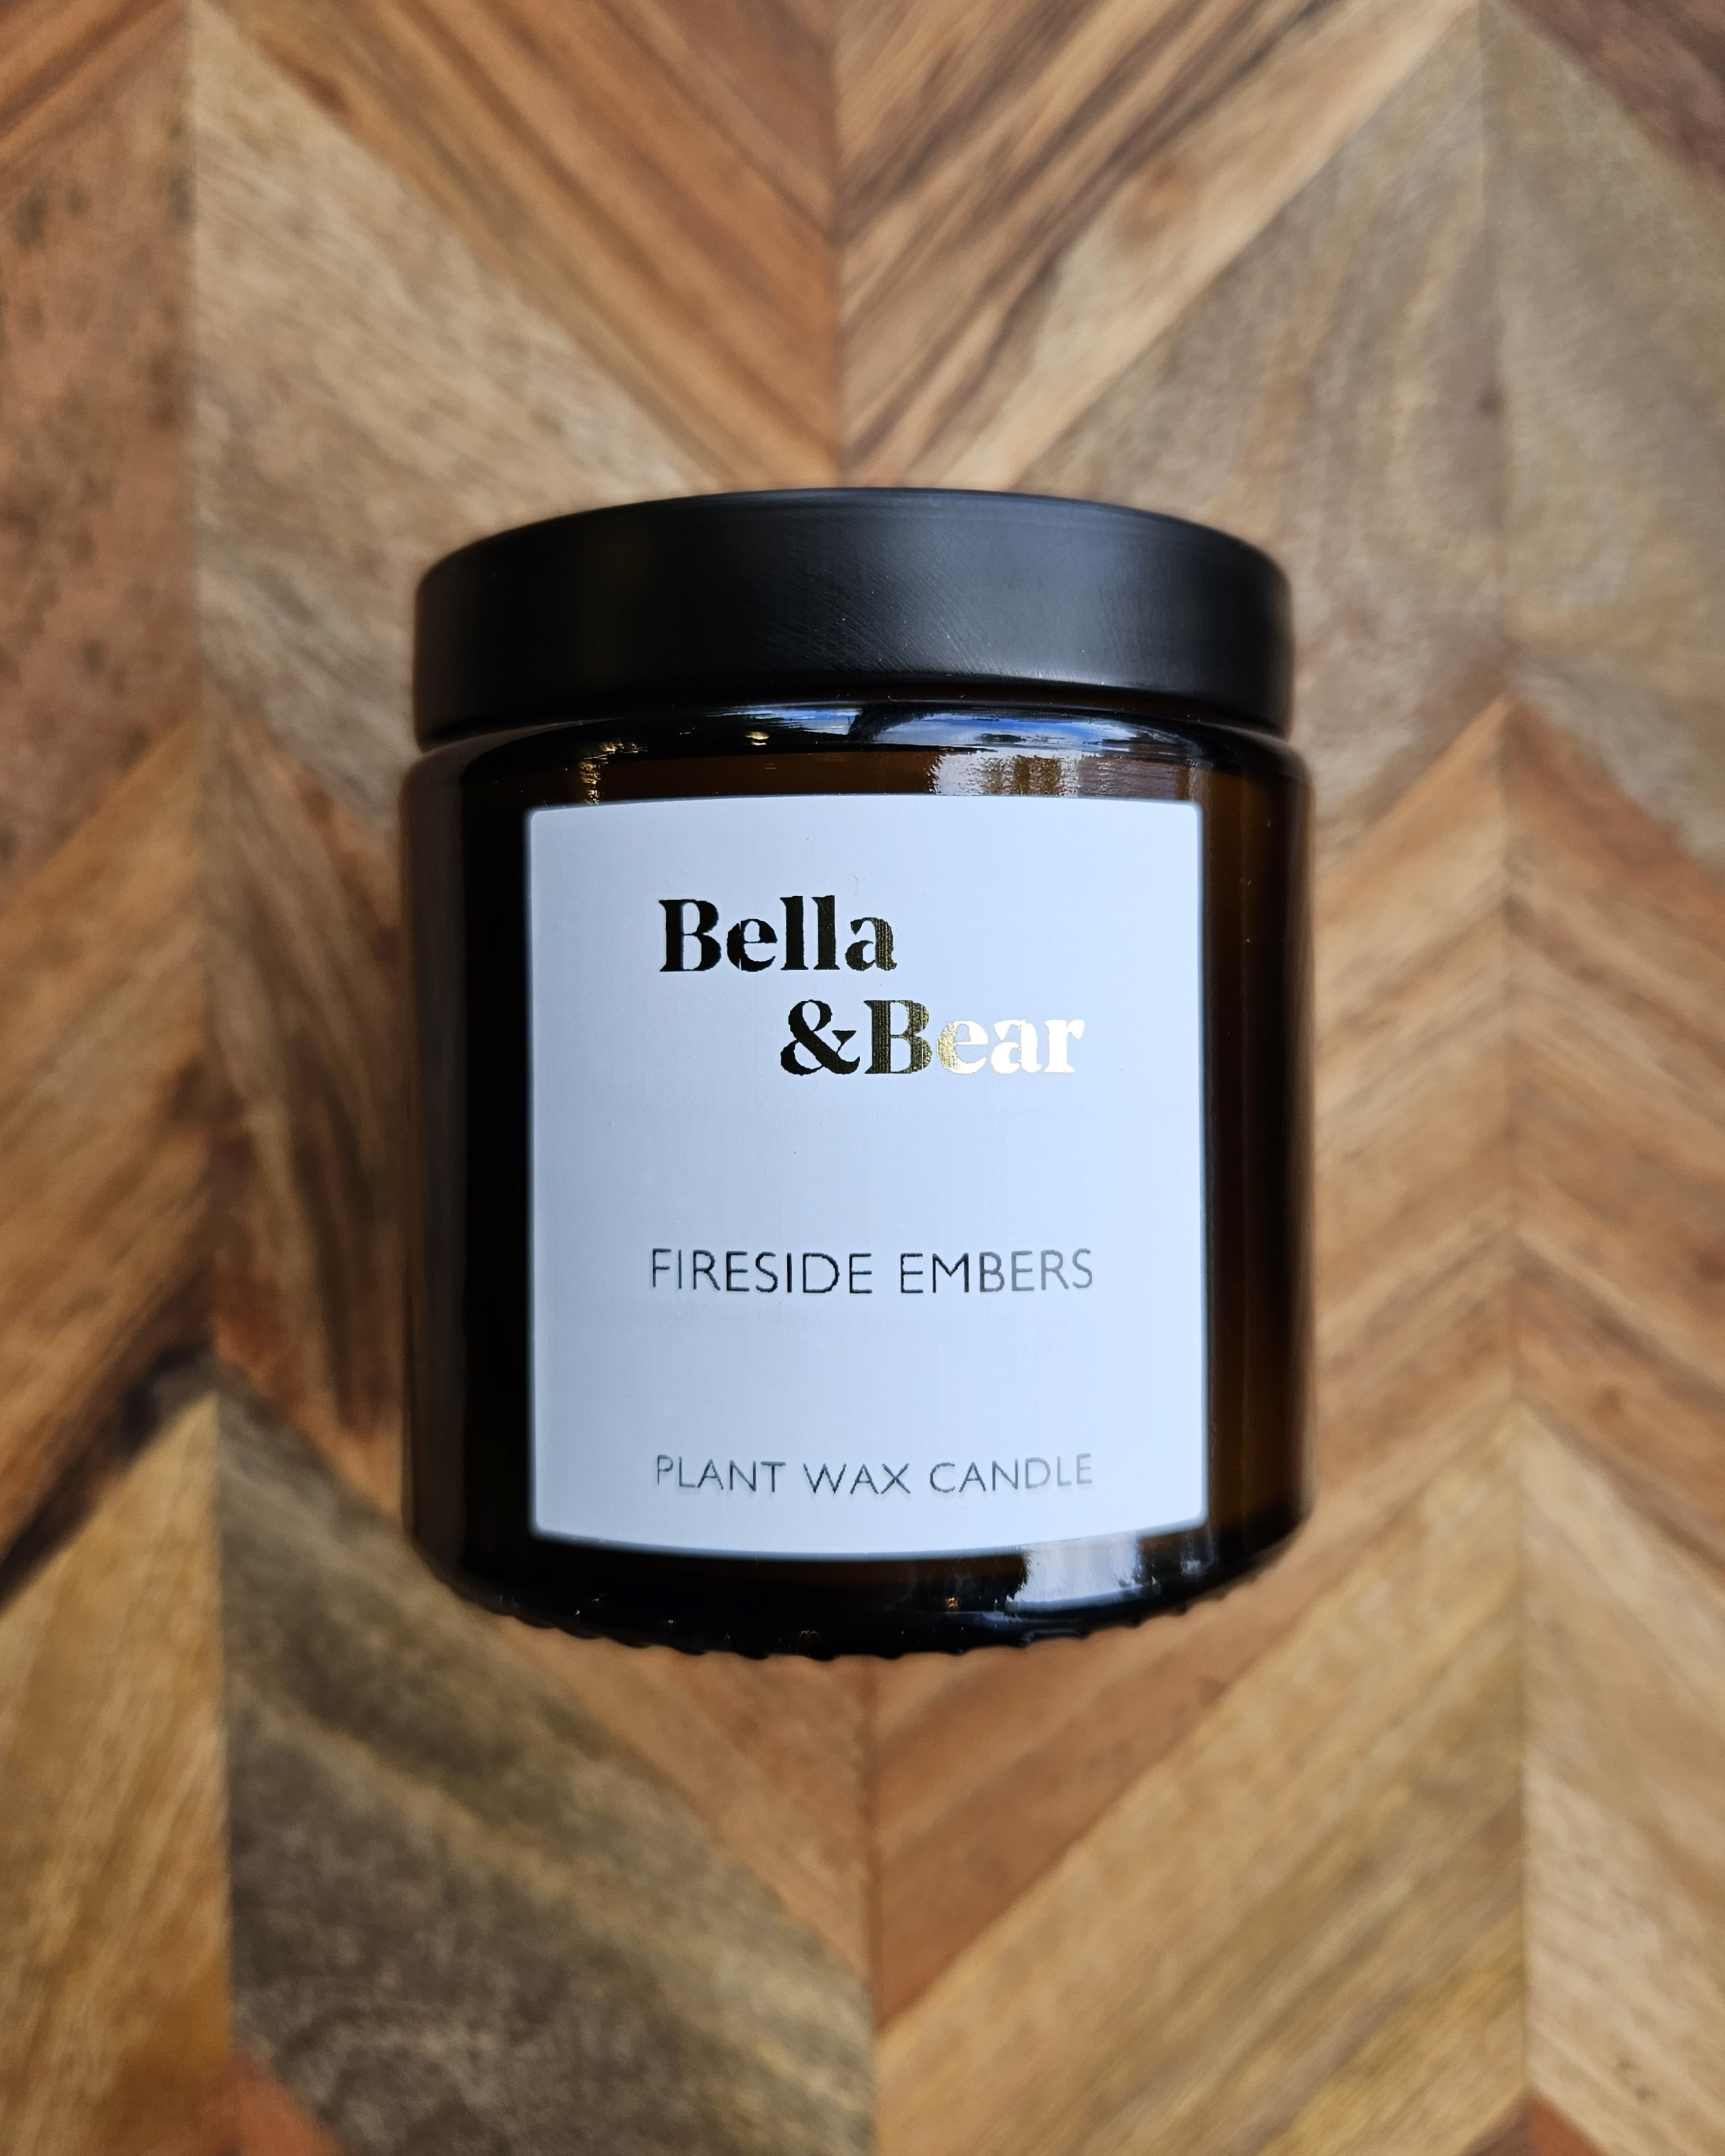 Fireside Embers Scented Candle